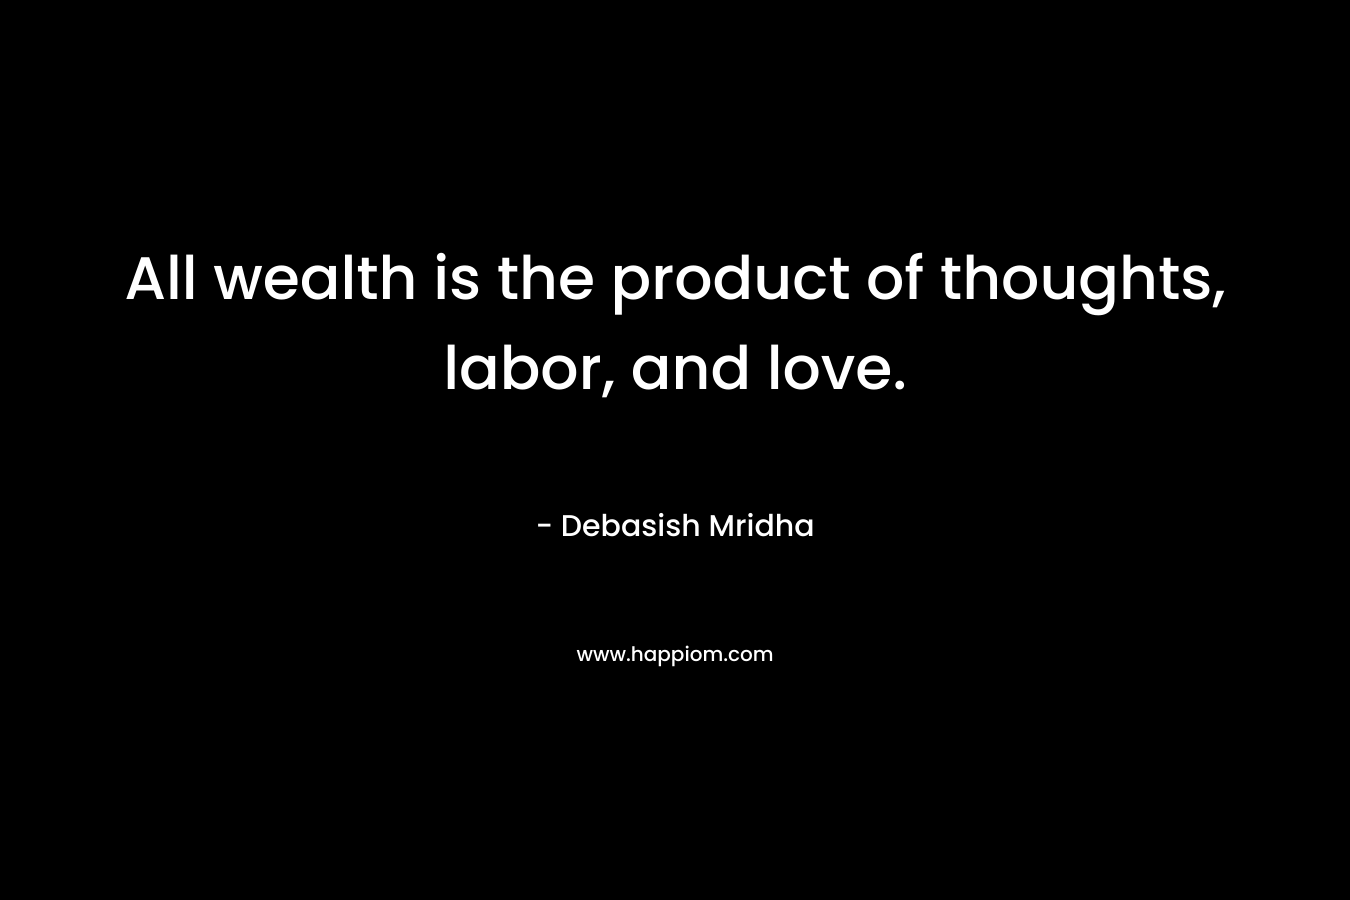 All wealth is the product of thoughts, labor, and love.